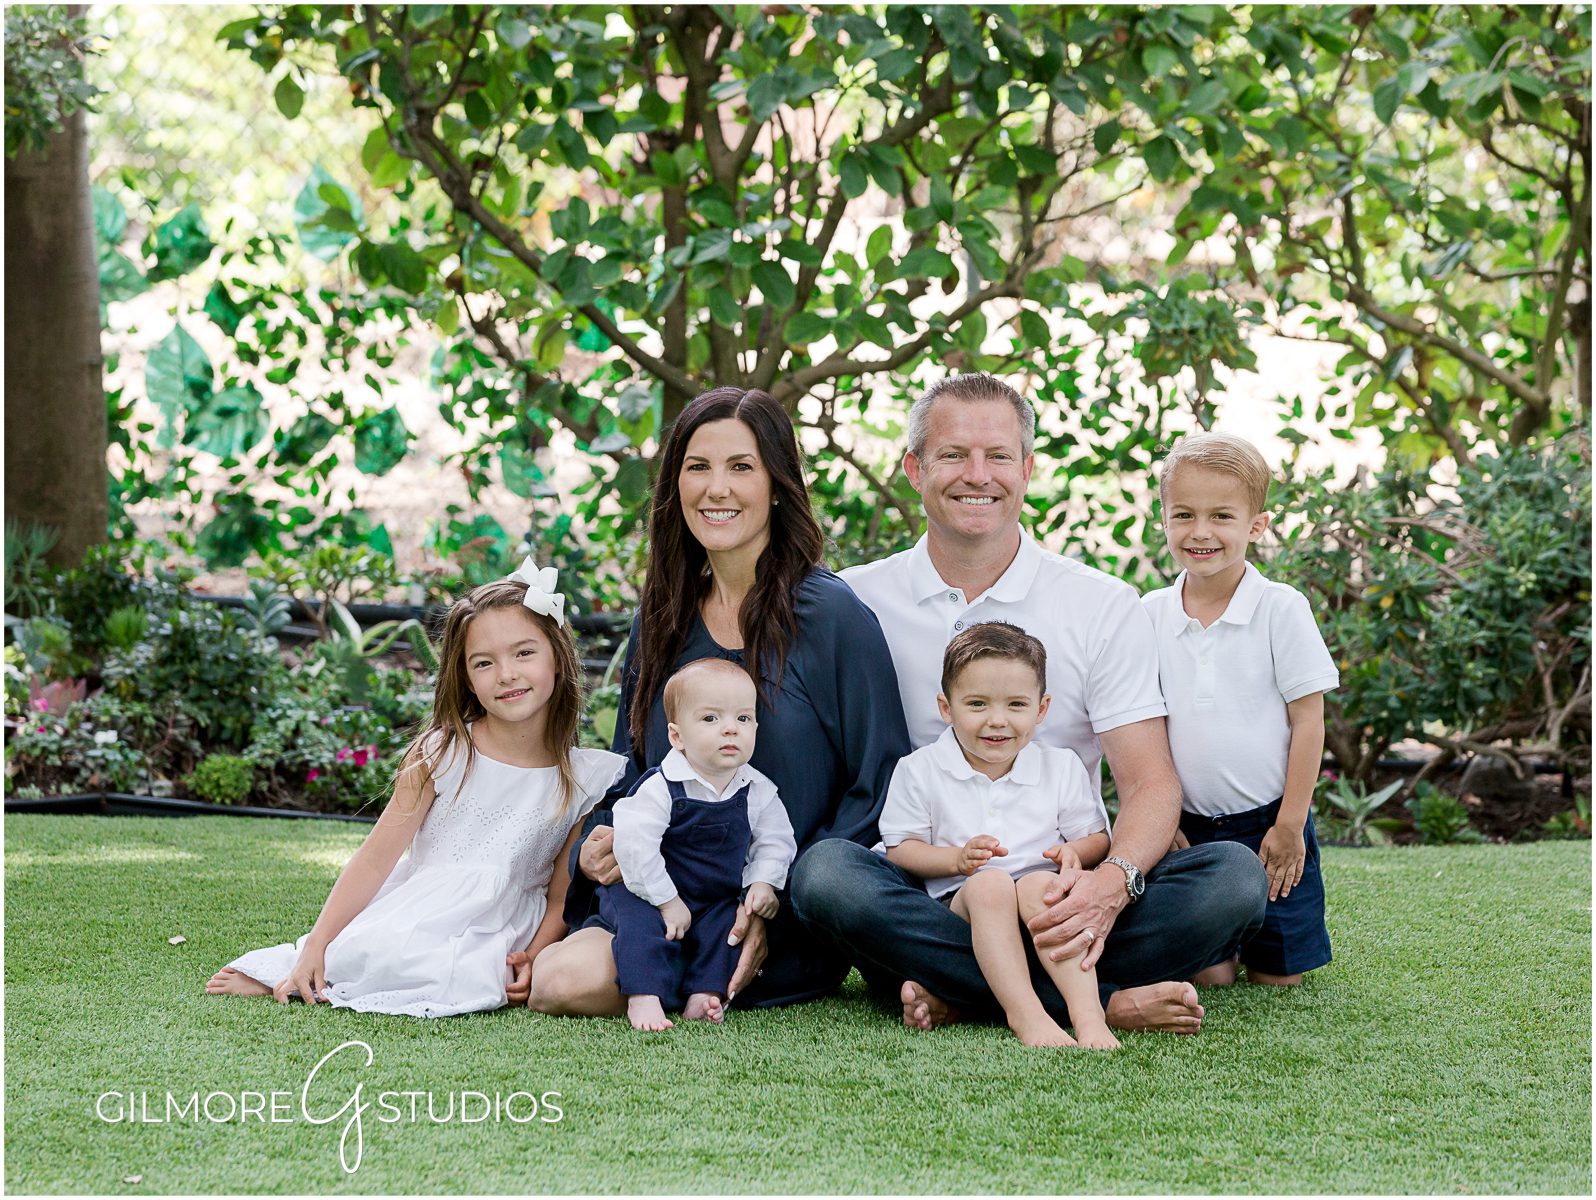 Orange County Family Photography, newport beach portrait photographer, OC, outfits, 4 kids, colors, grass, park, outdoors, green, spring, summer